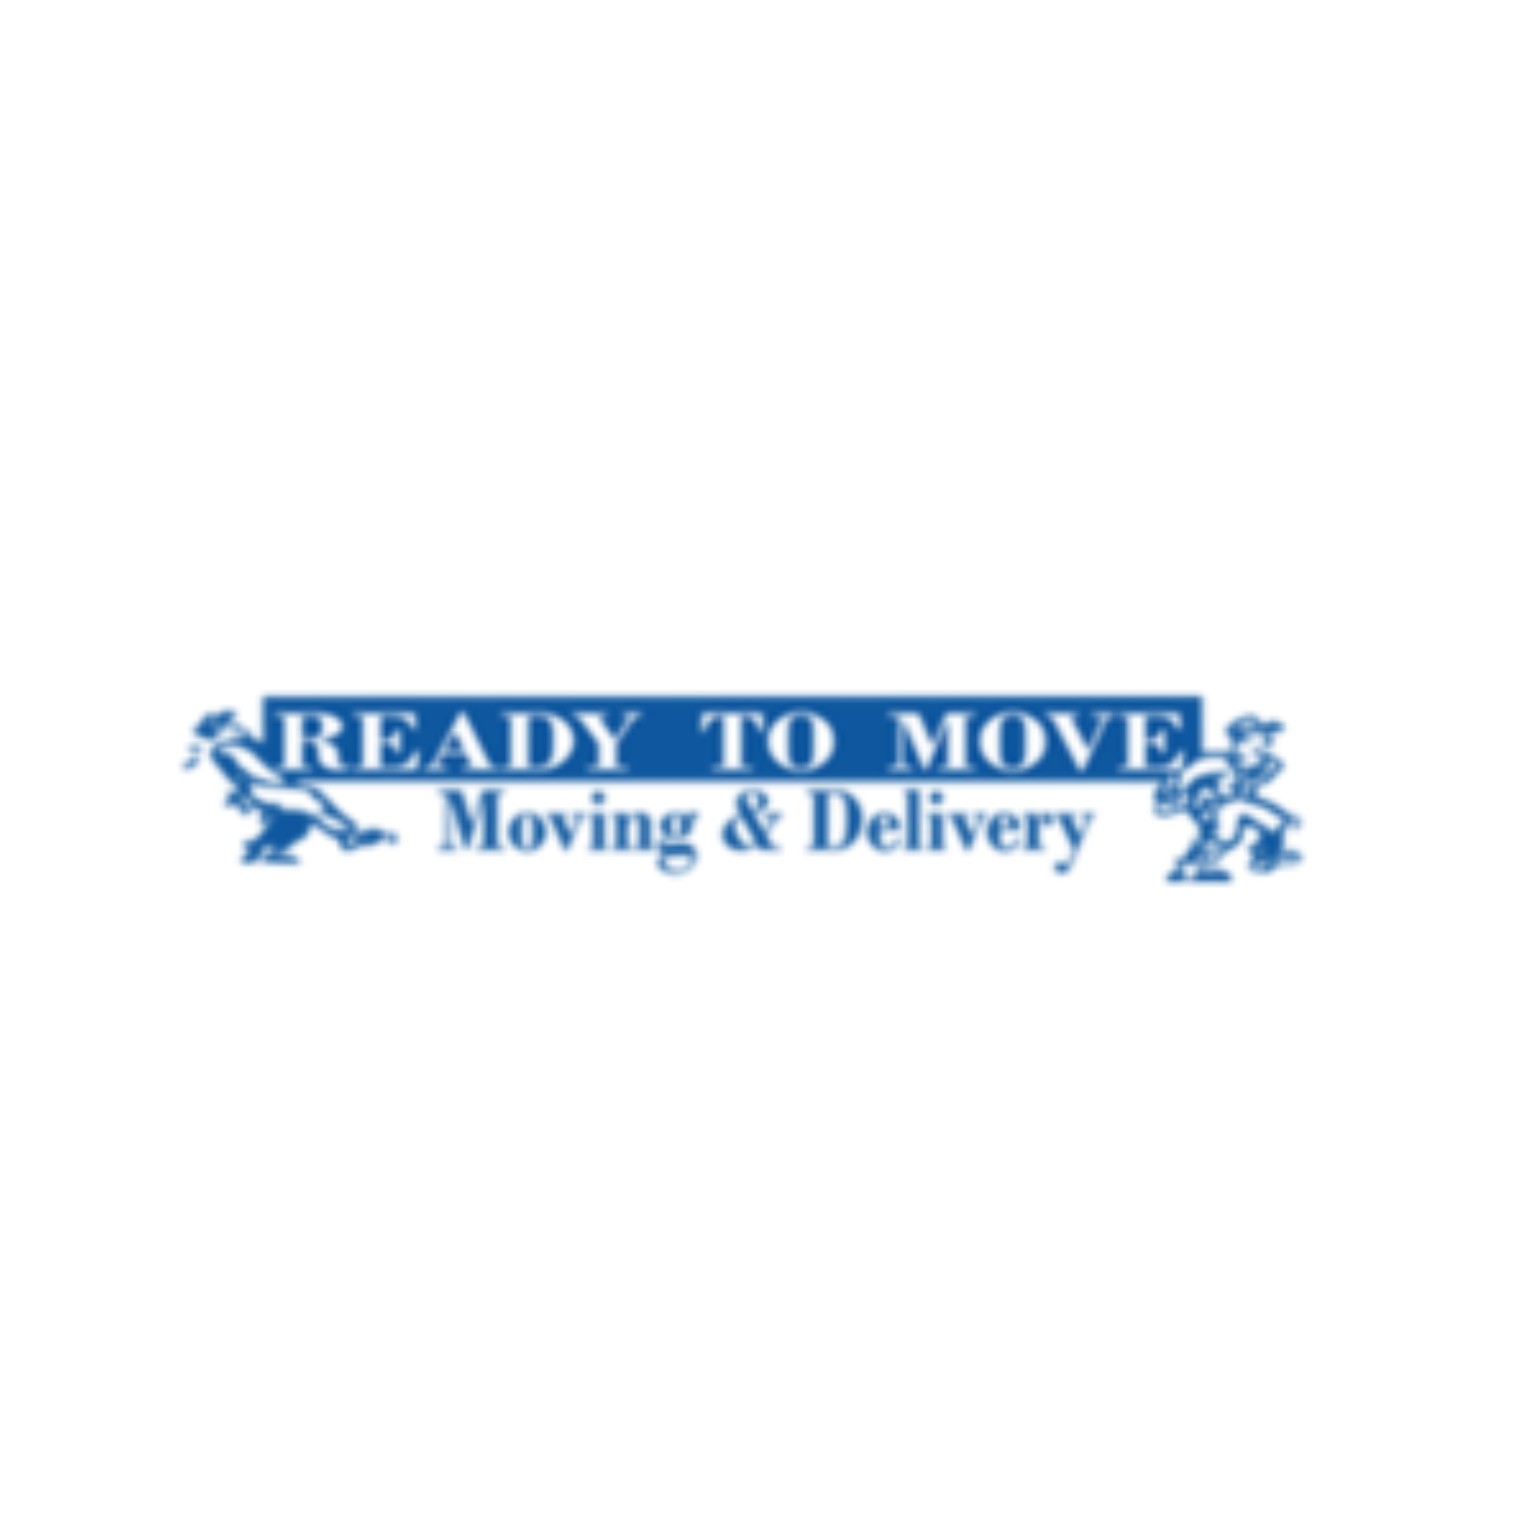 Affordable Commercial Relocation Services In Macon | Ready To Move LLC